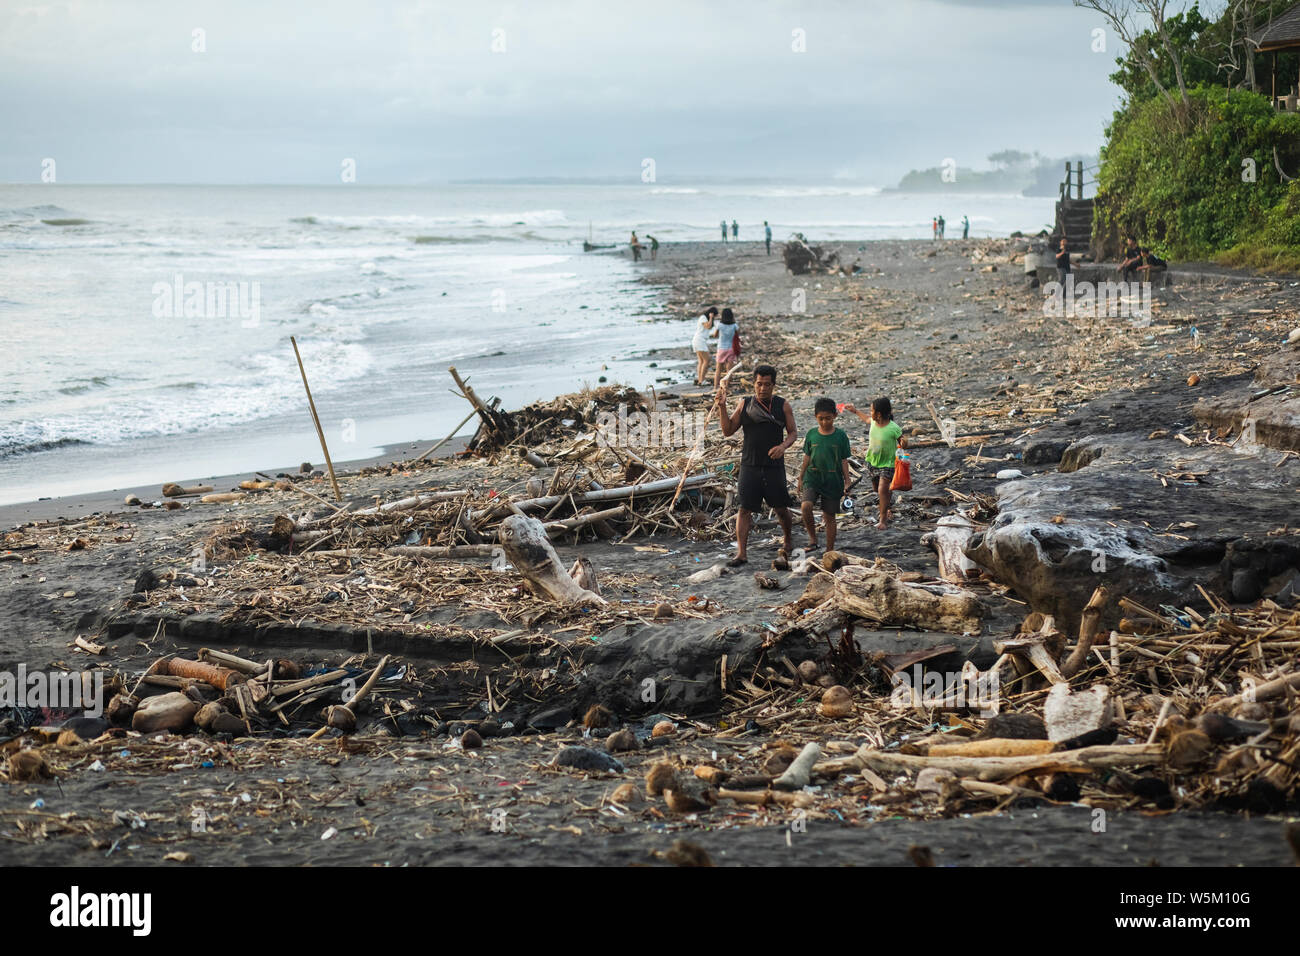 BALI, INDONESIA - APRIL 31, 2019: Beach pollution in Bali. Hard life of local people around garbage on the beach. Recycling waste problem Stock Photo